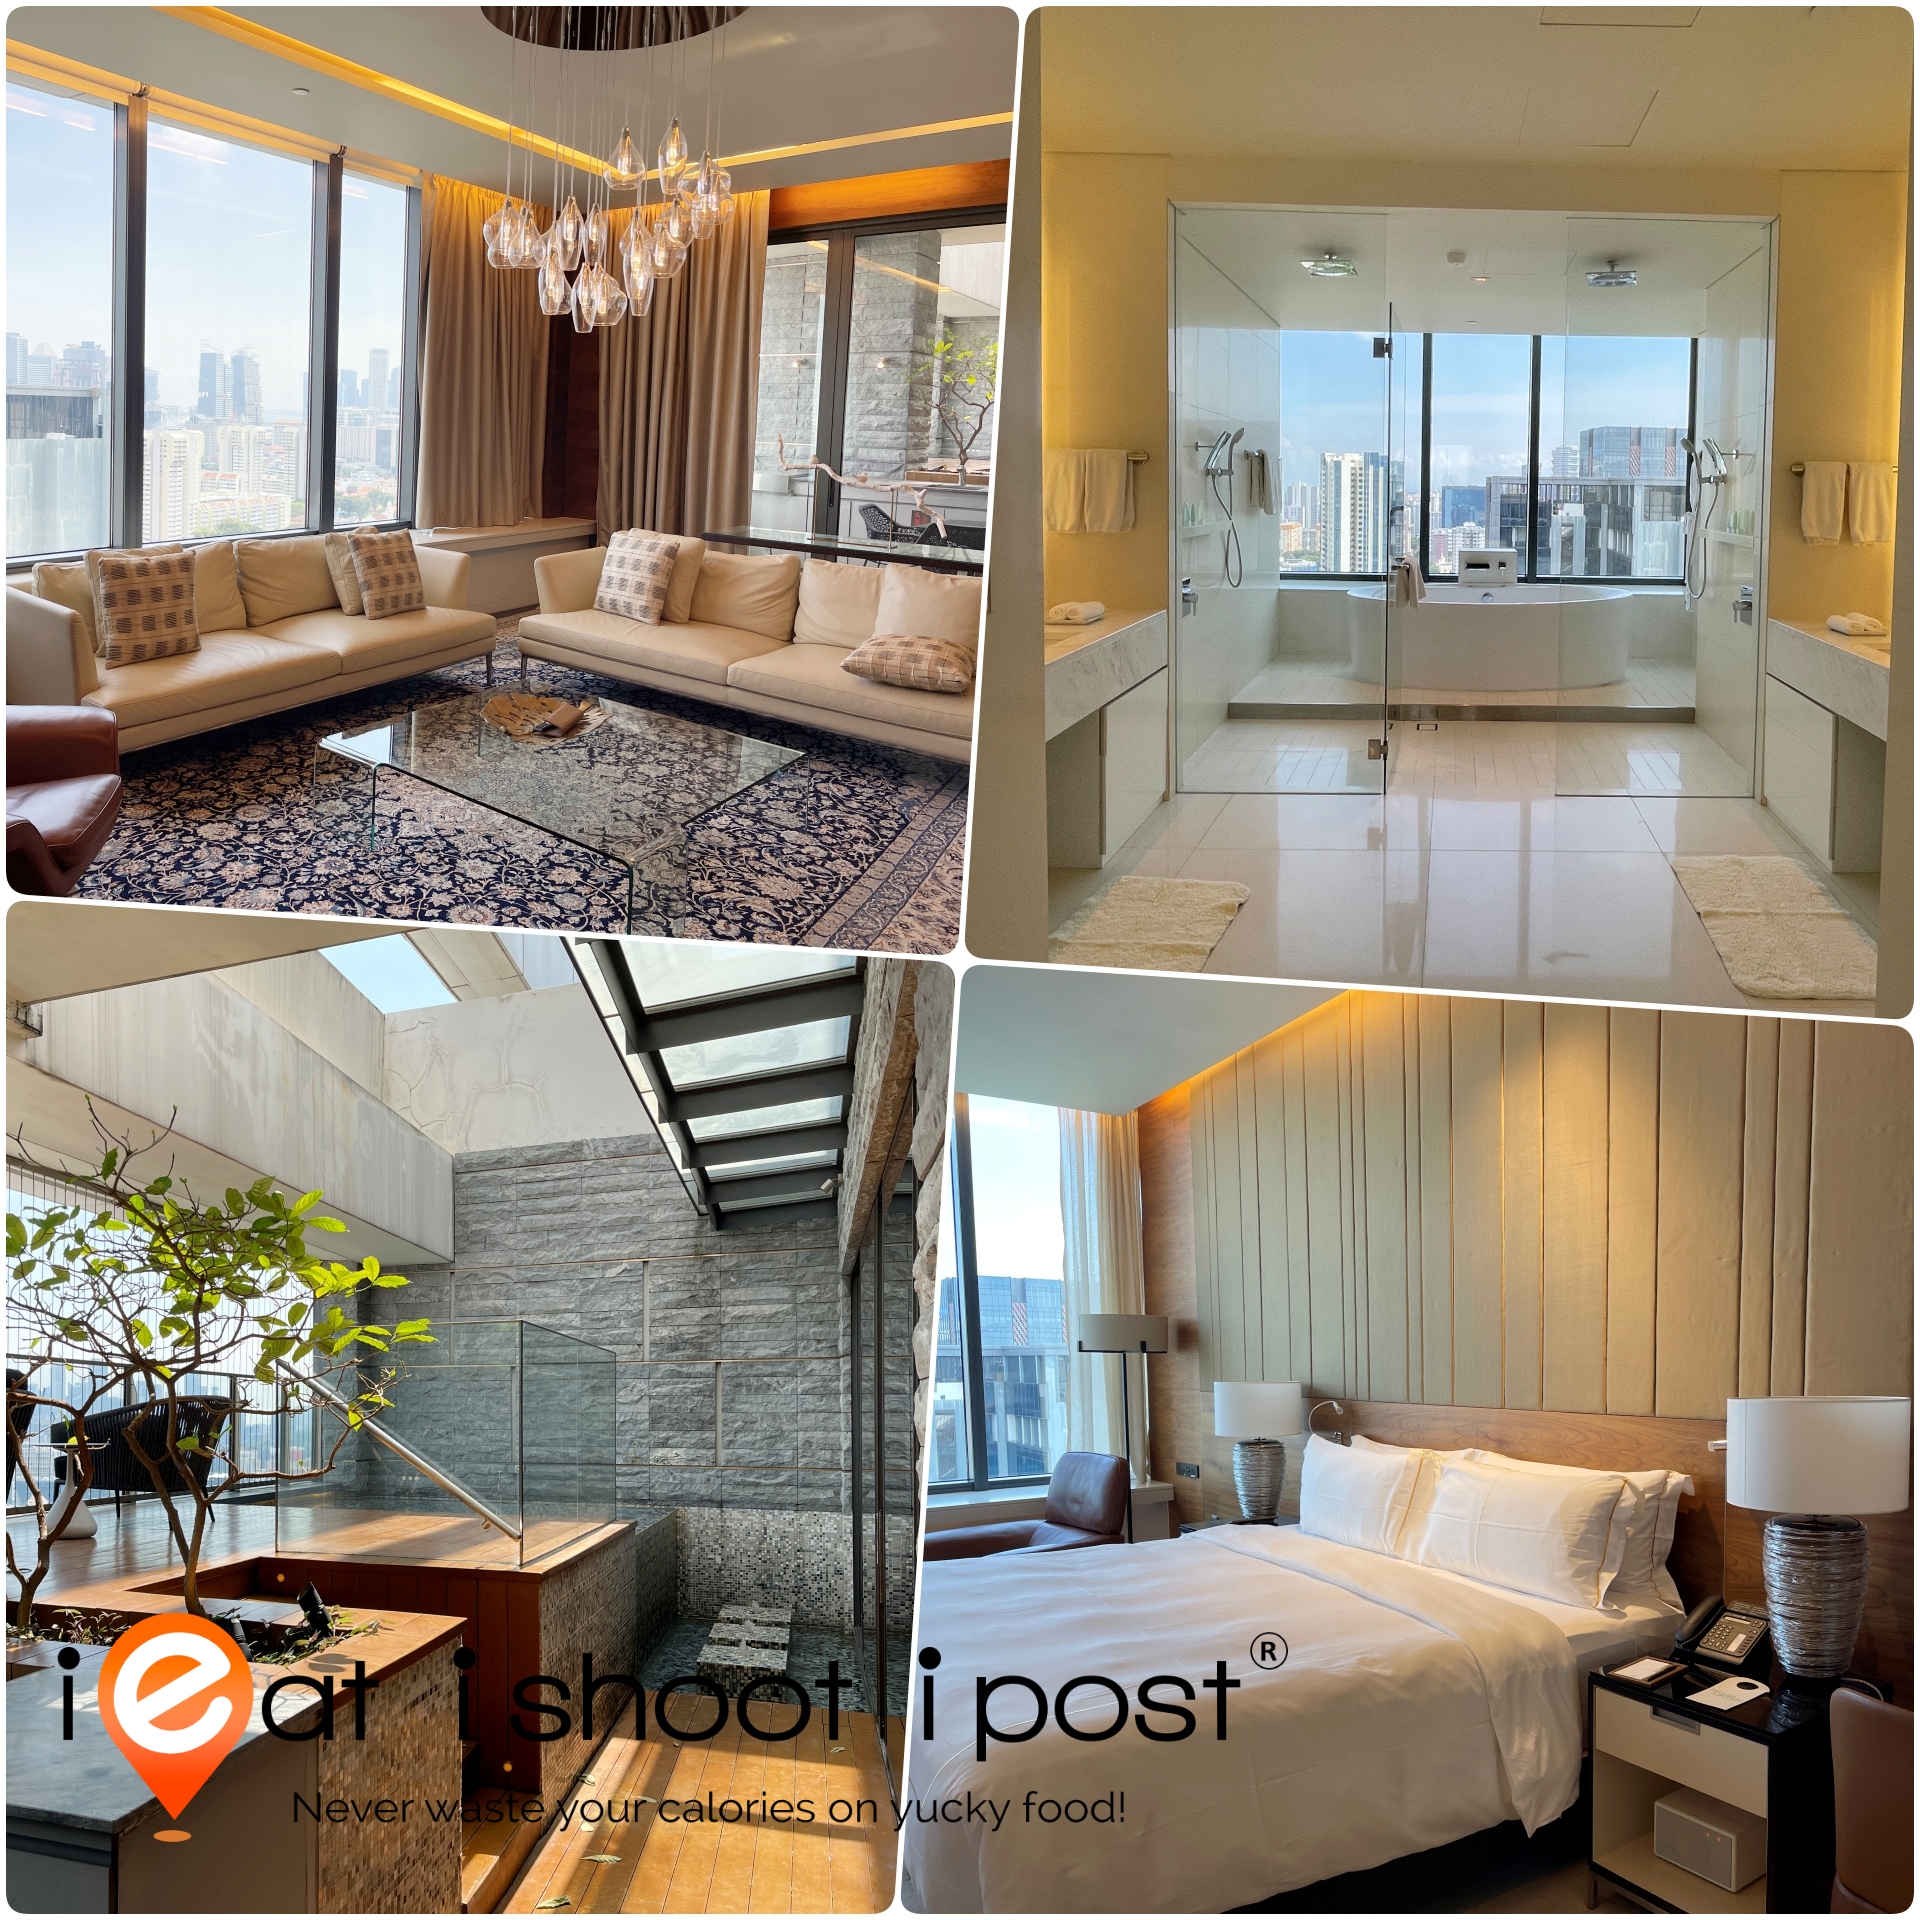 Presidential Suite (clockwise) - living room, master bathroom, master bedroom and balcony spa 